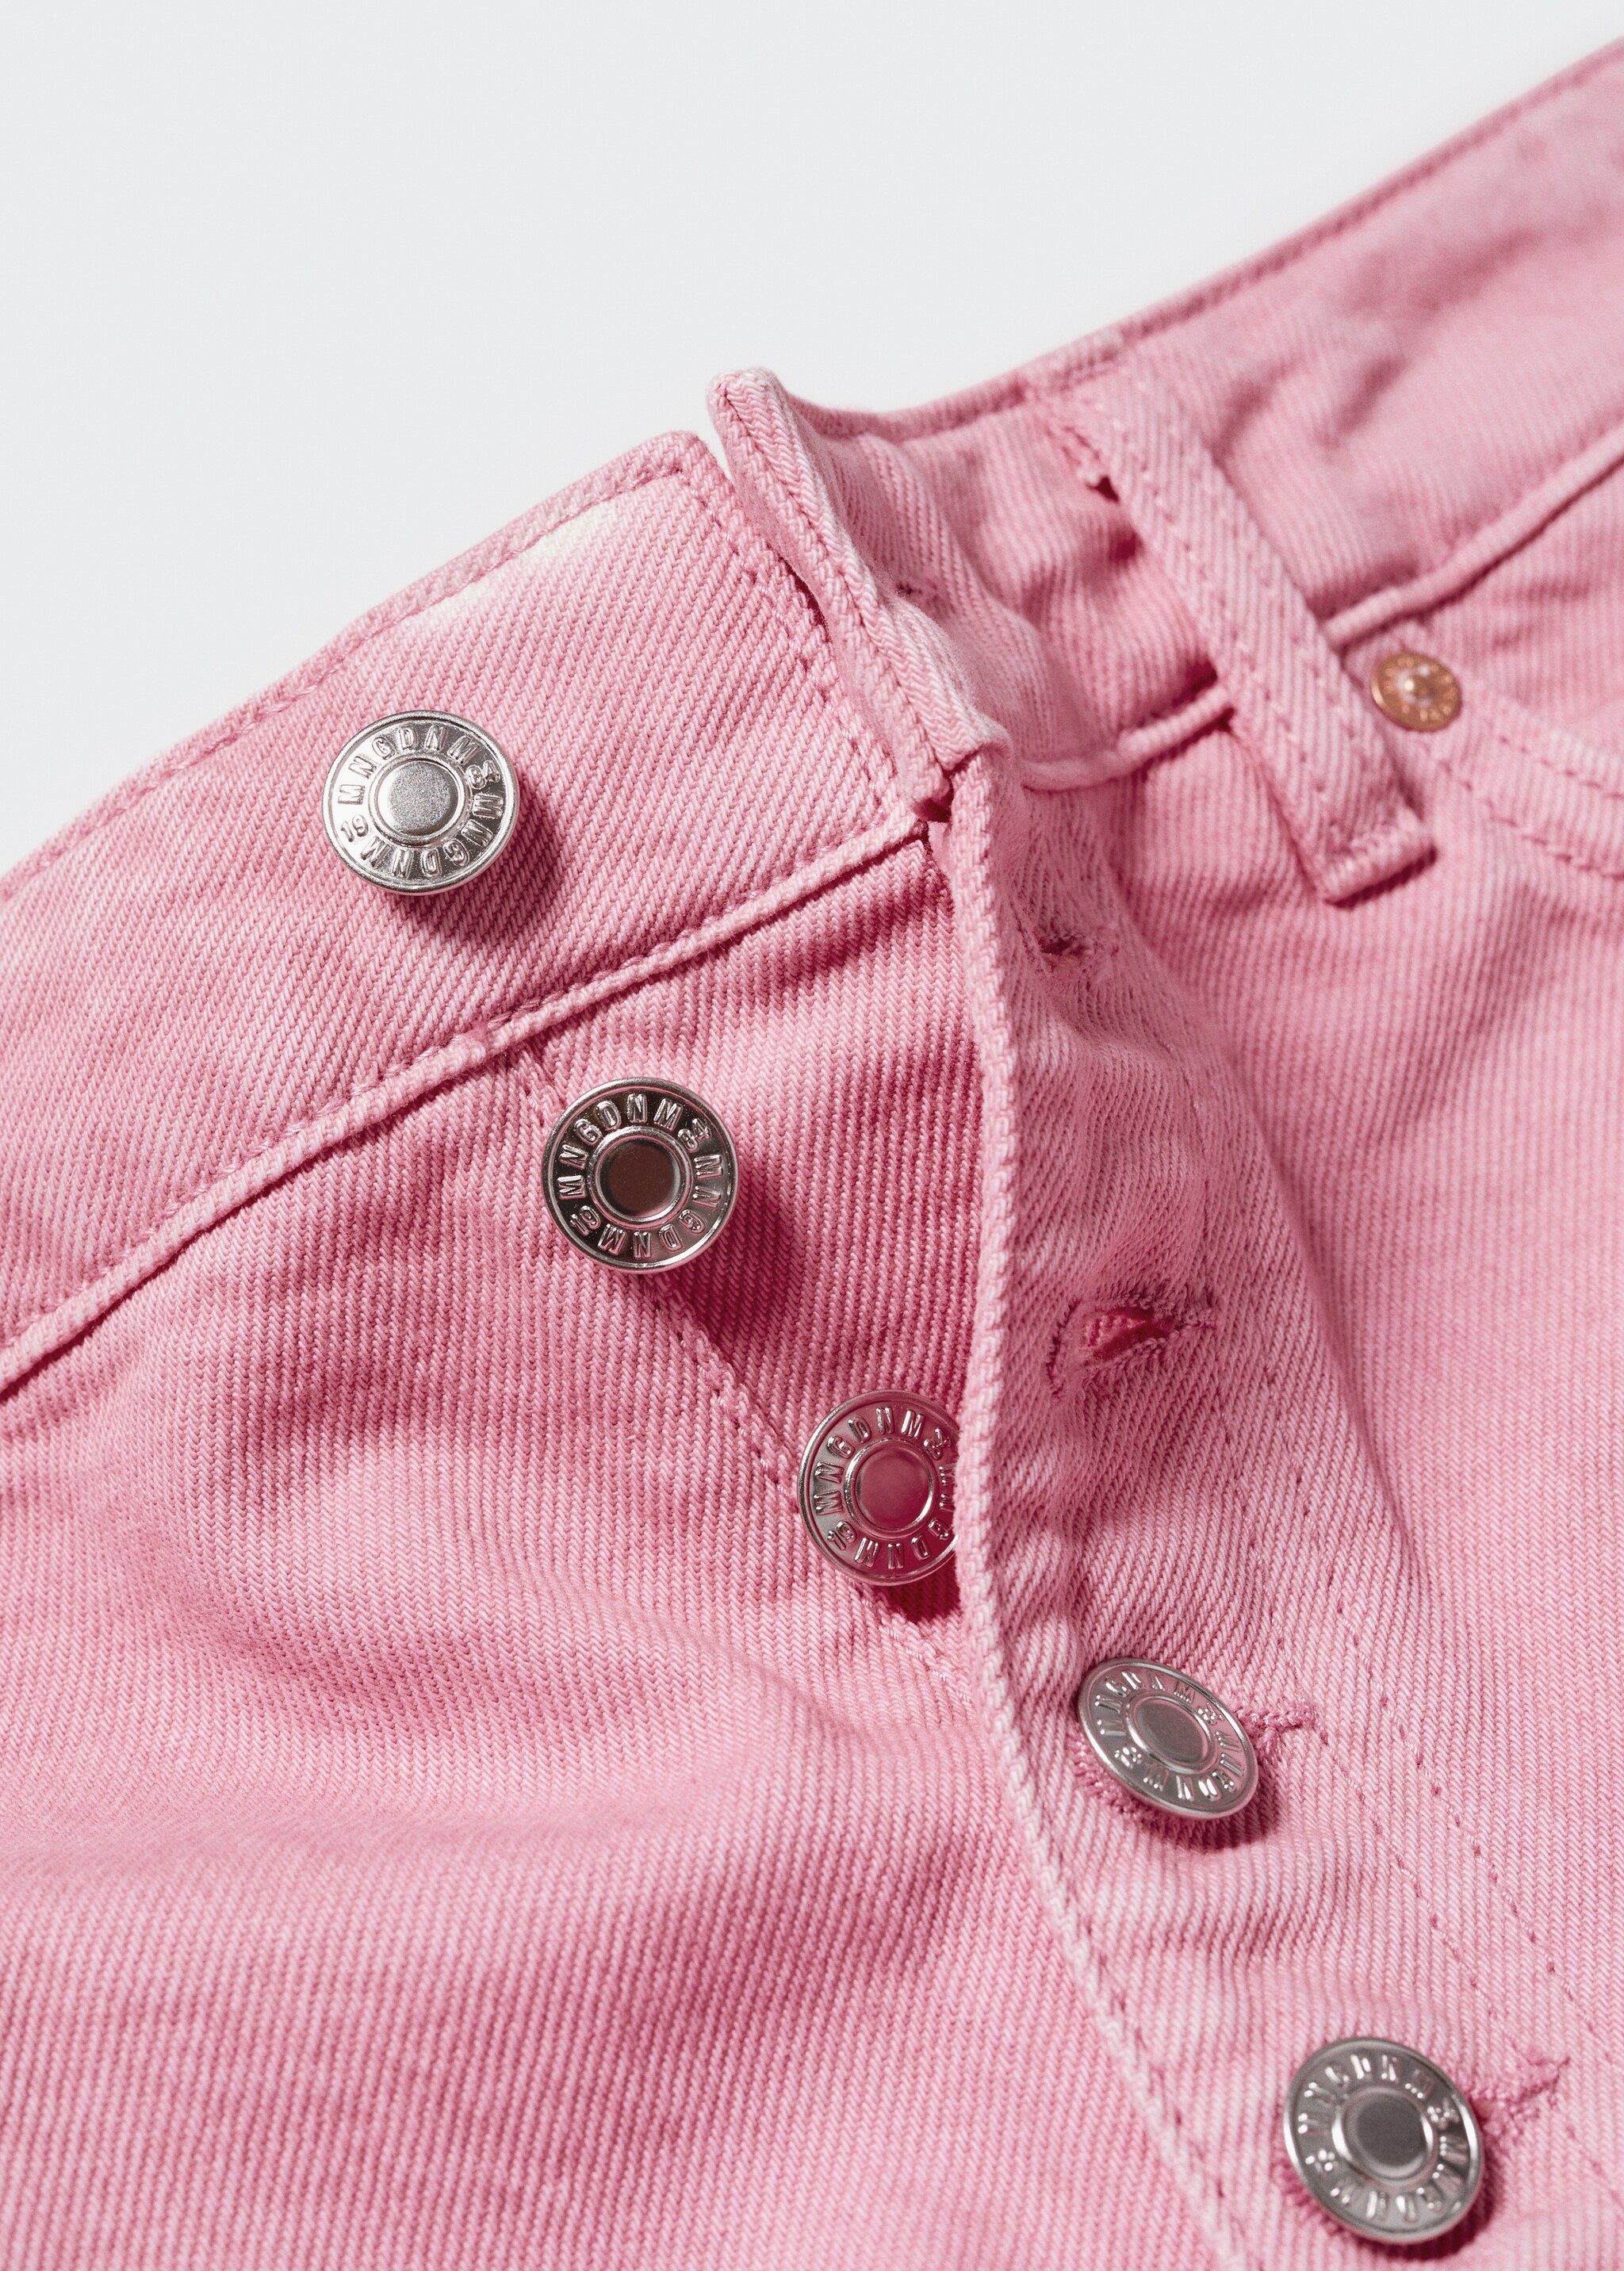 Denim shorts with buttons - Details of the article 8